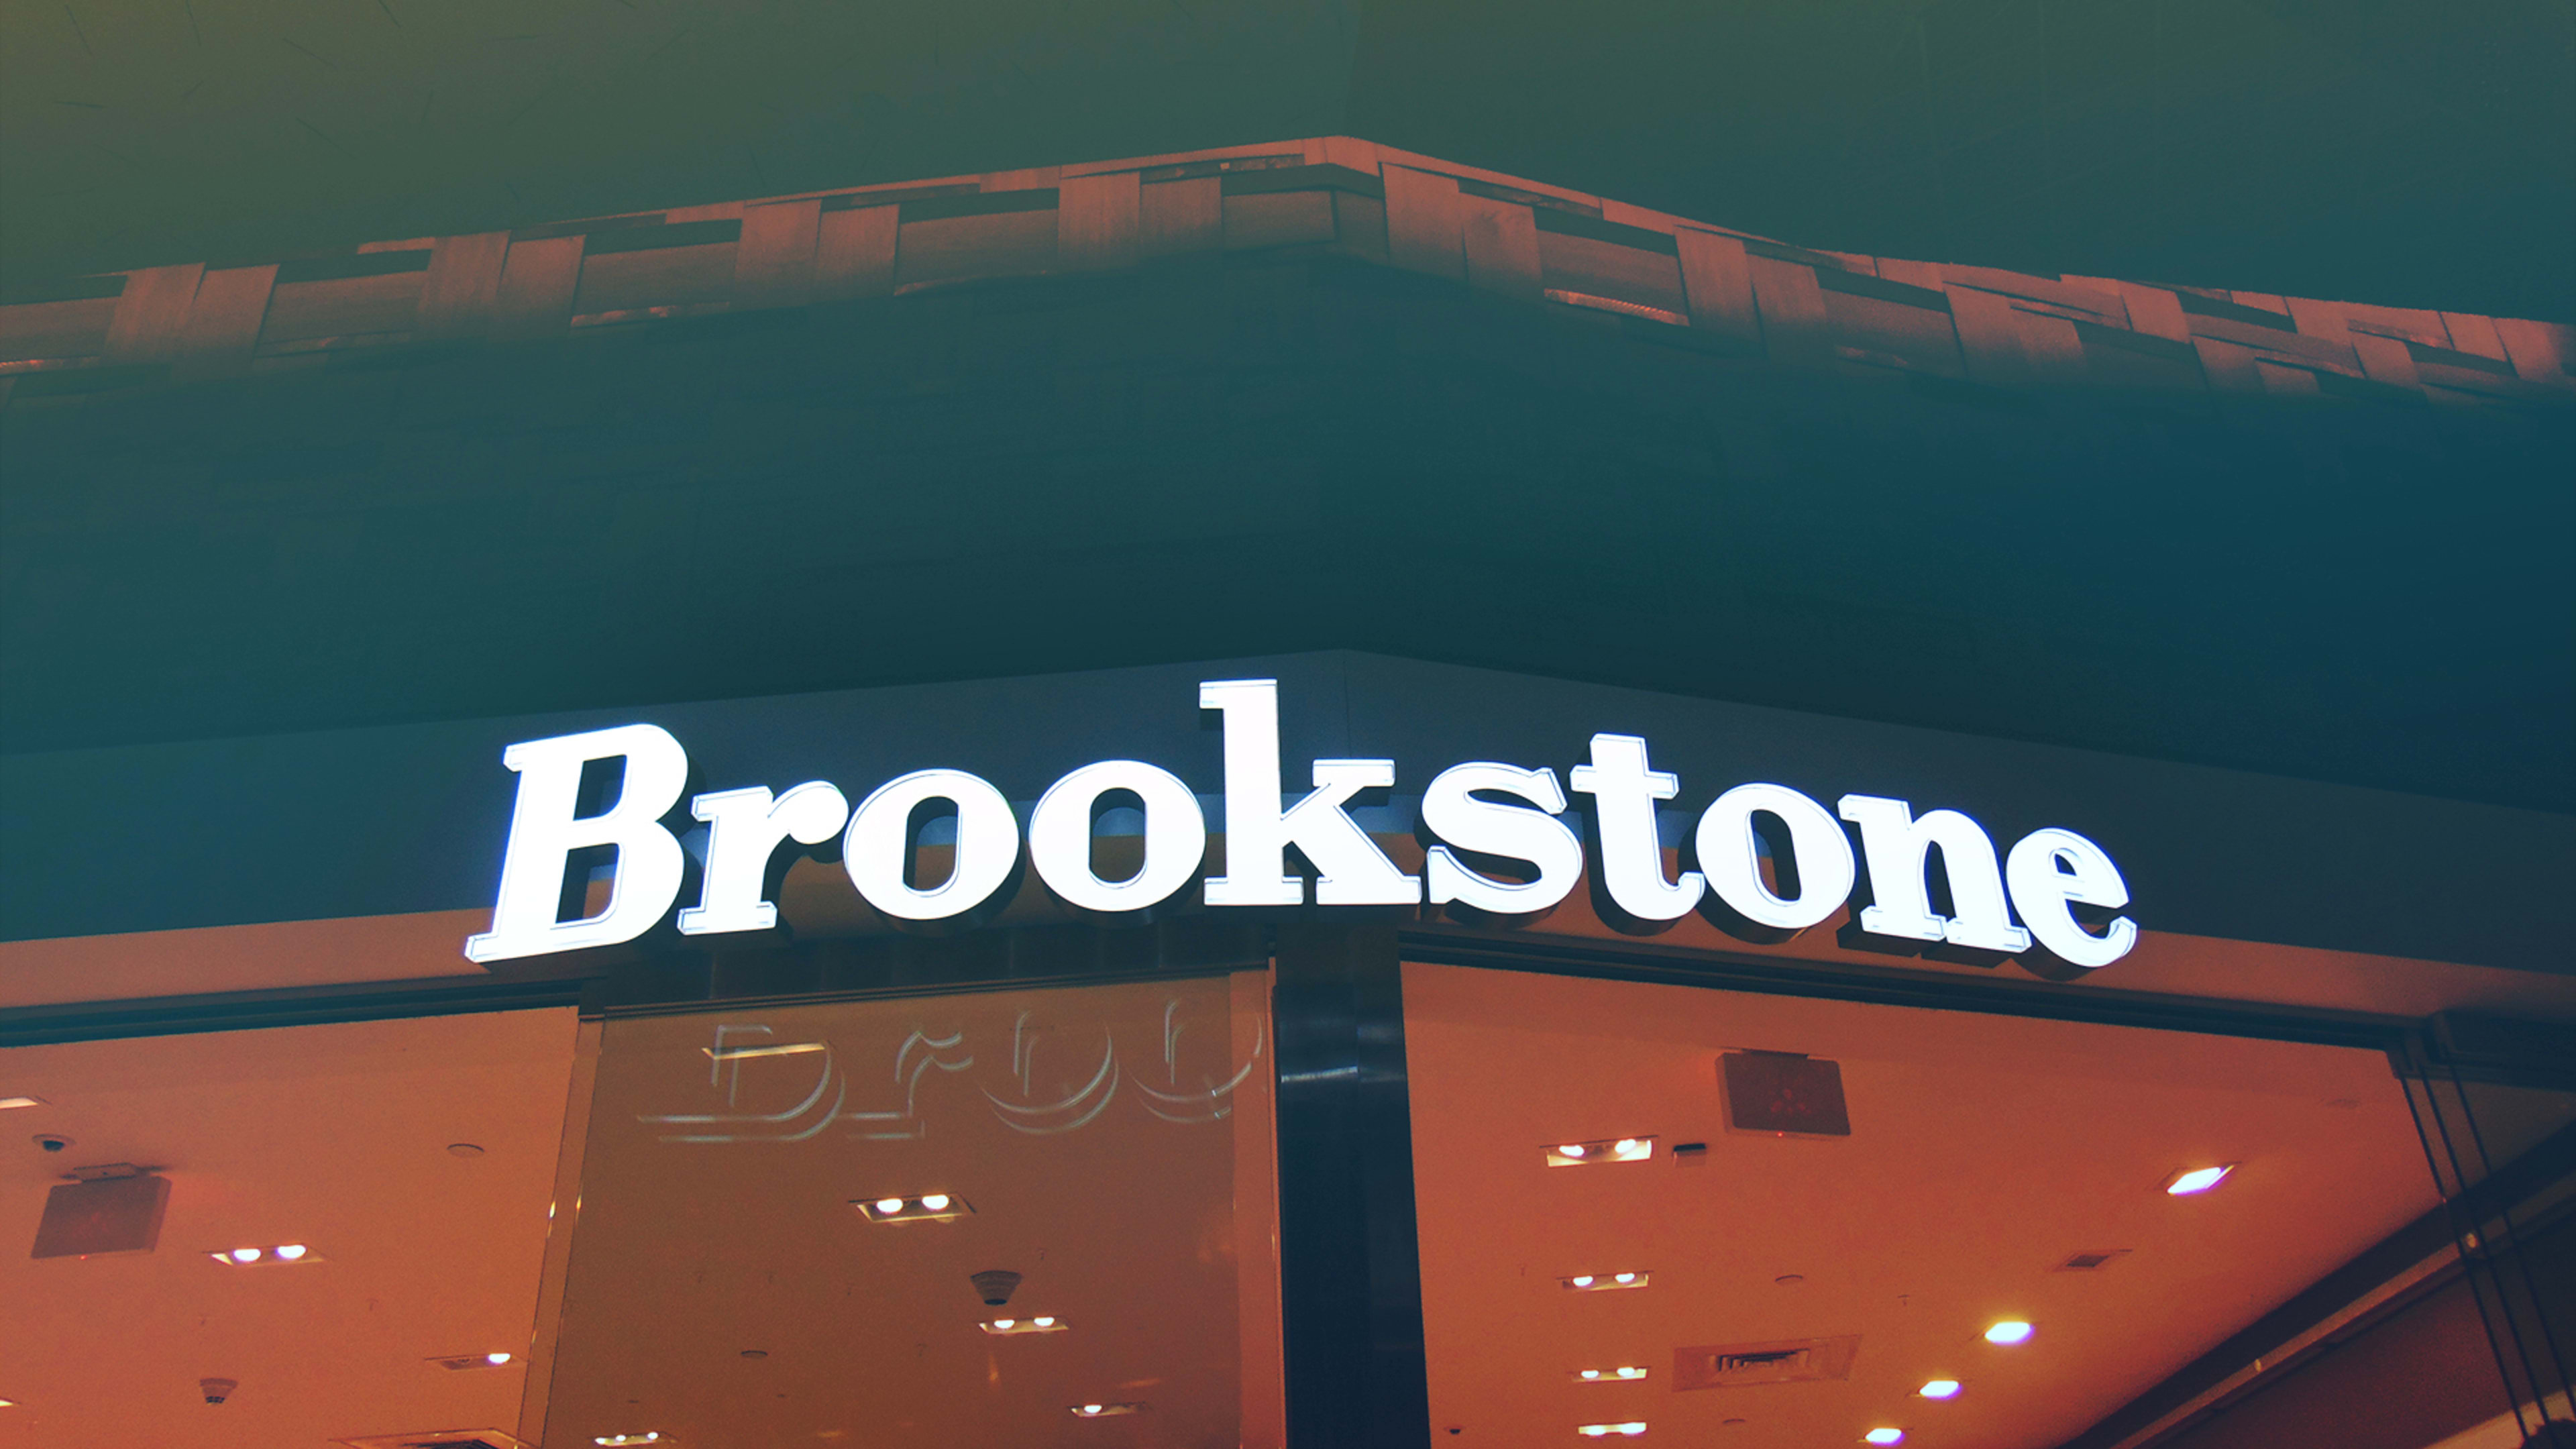 Once upon a time, Brookstone was surprisingly cool